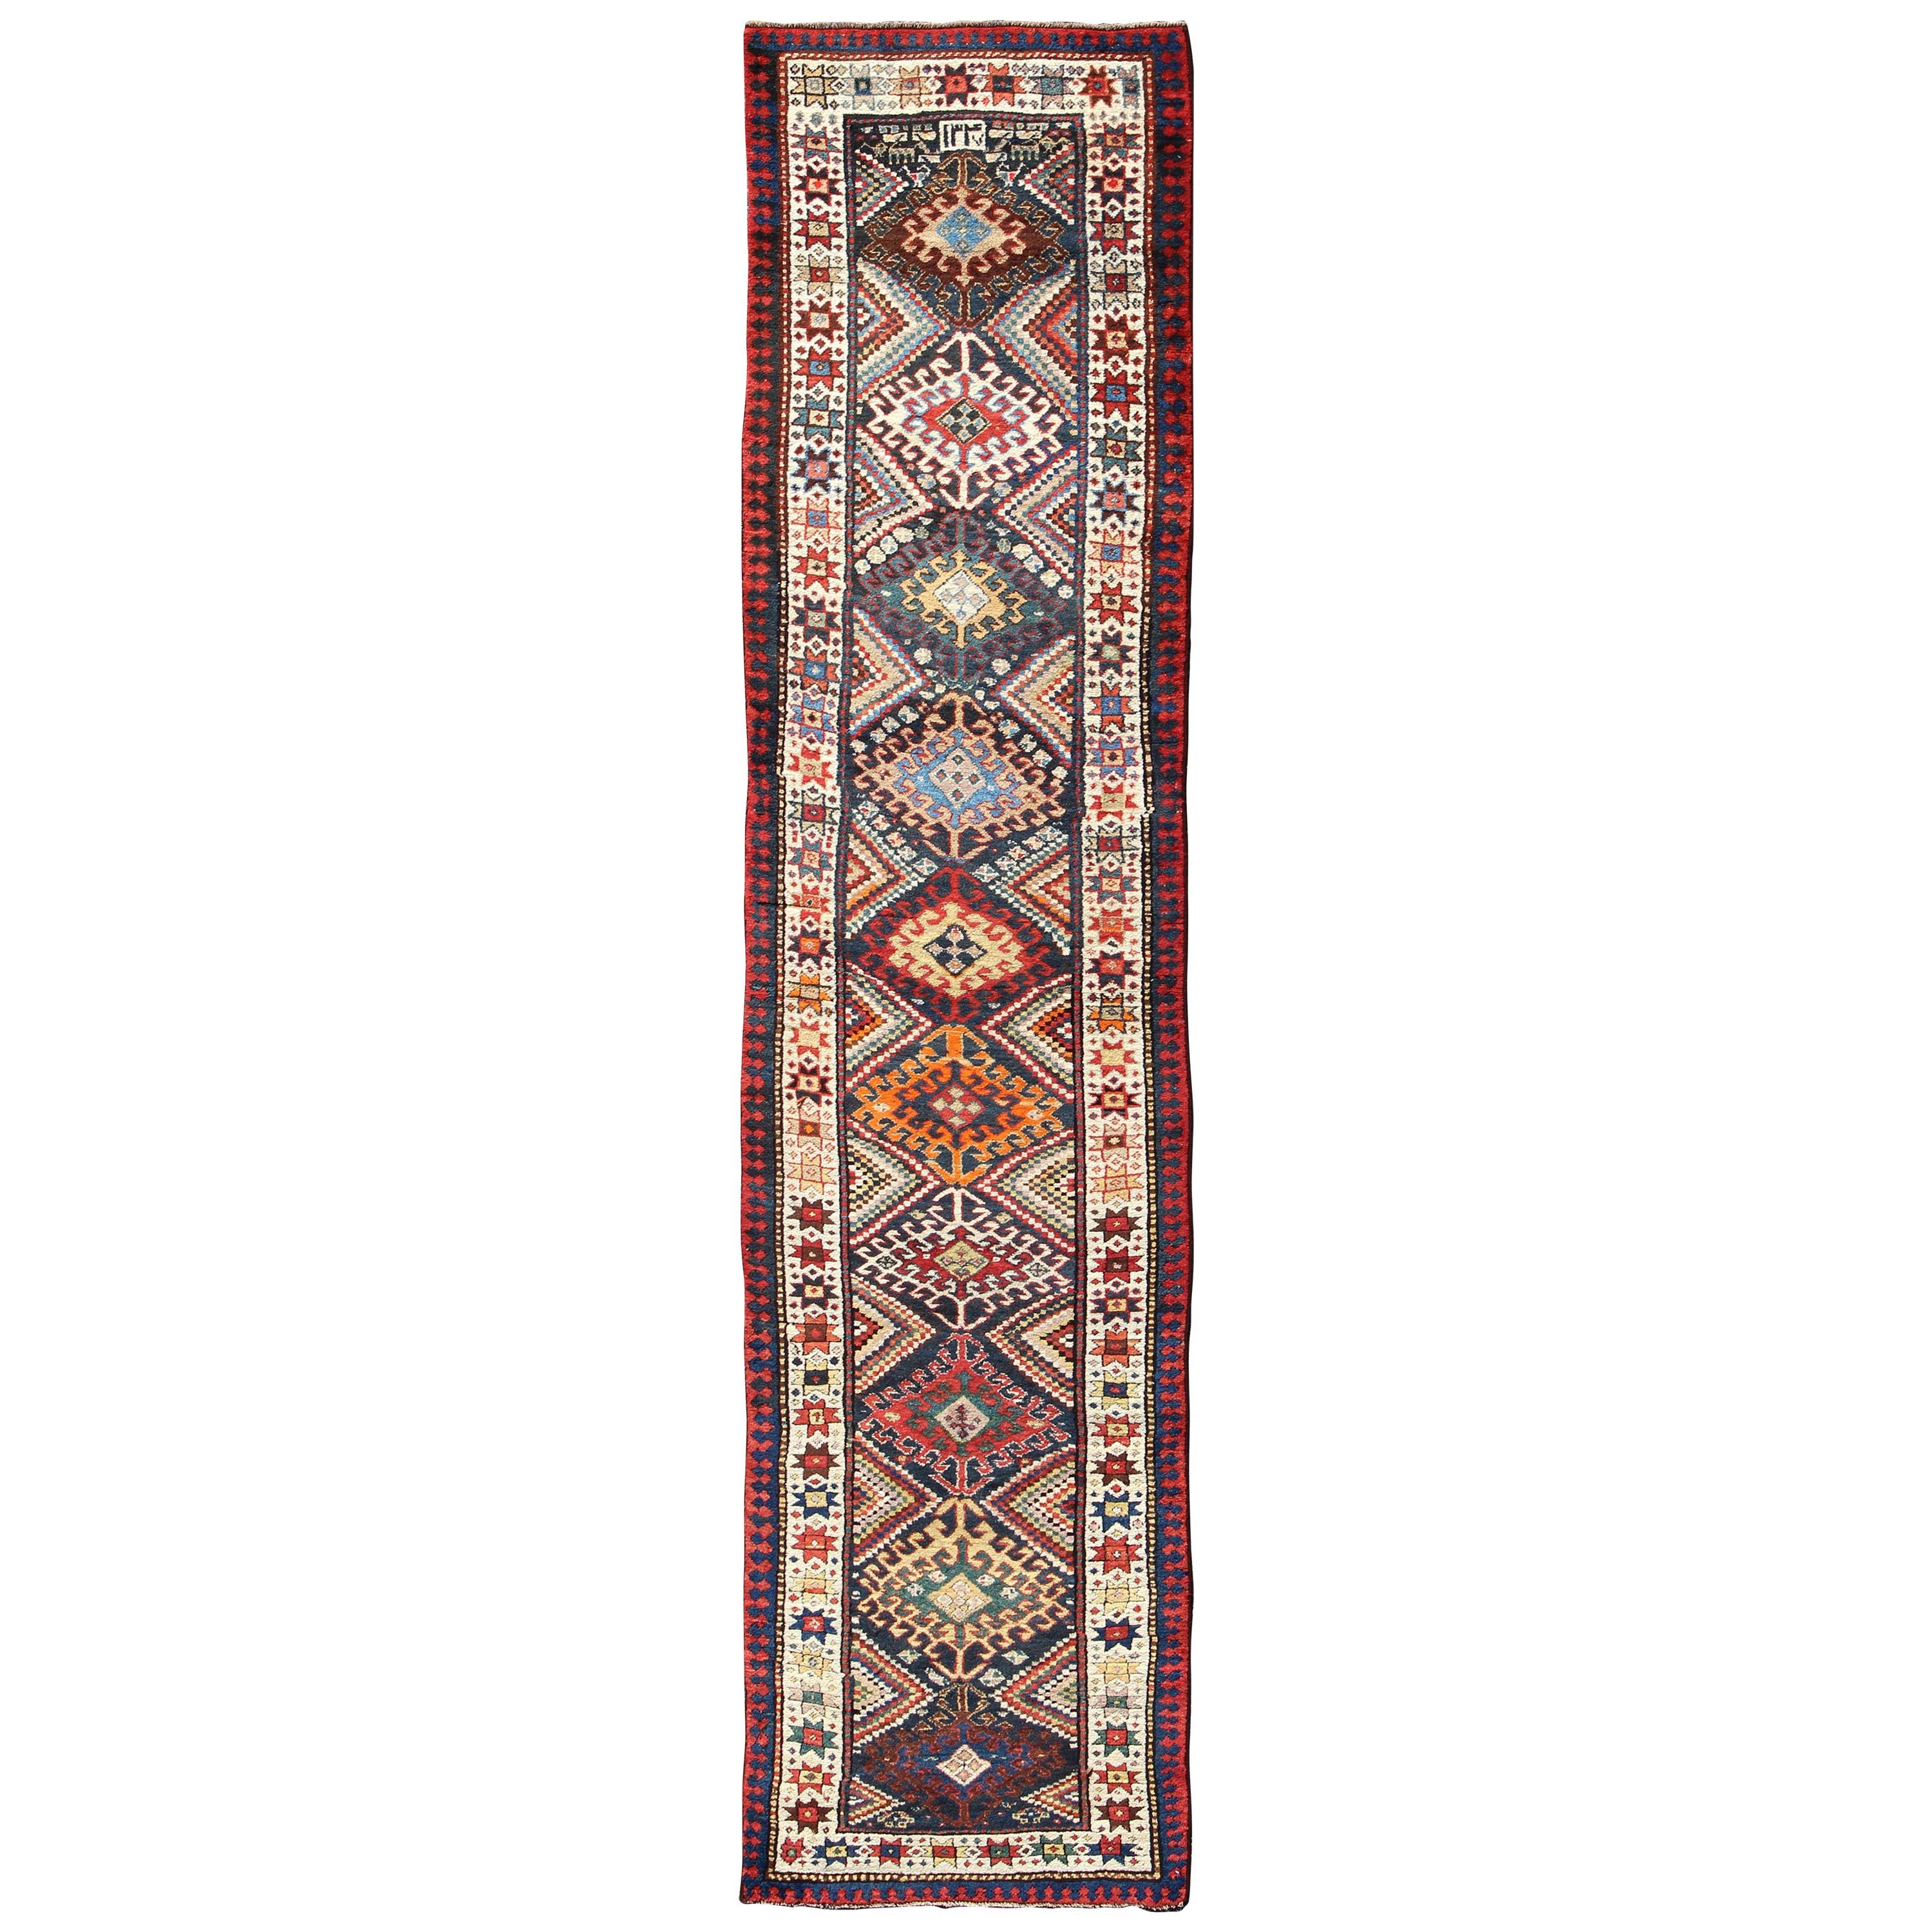 Multicolored Antique Caucasian Kazak Runner with Hooked Latch's and Star Motifs